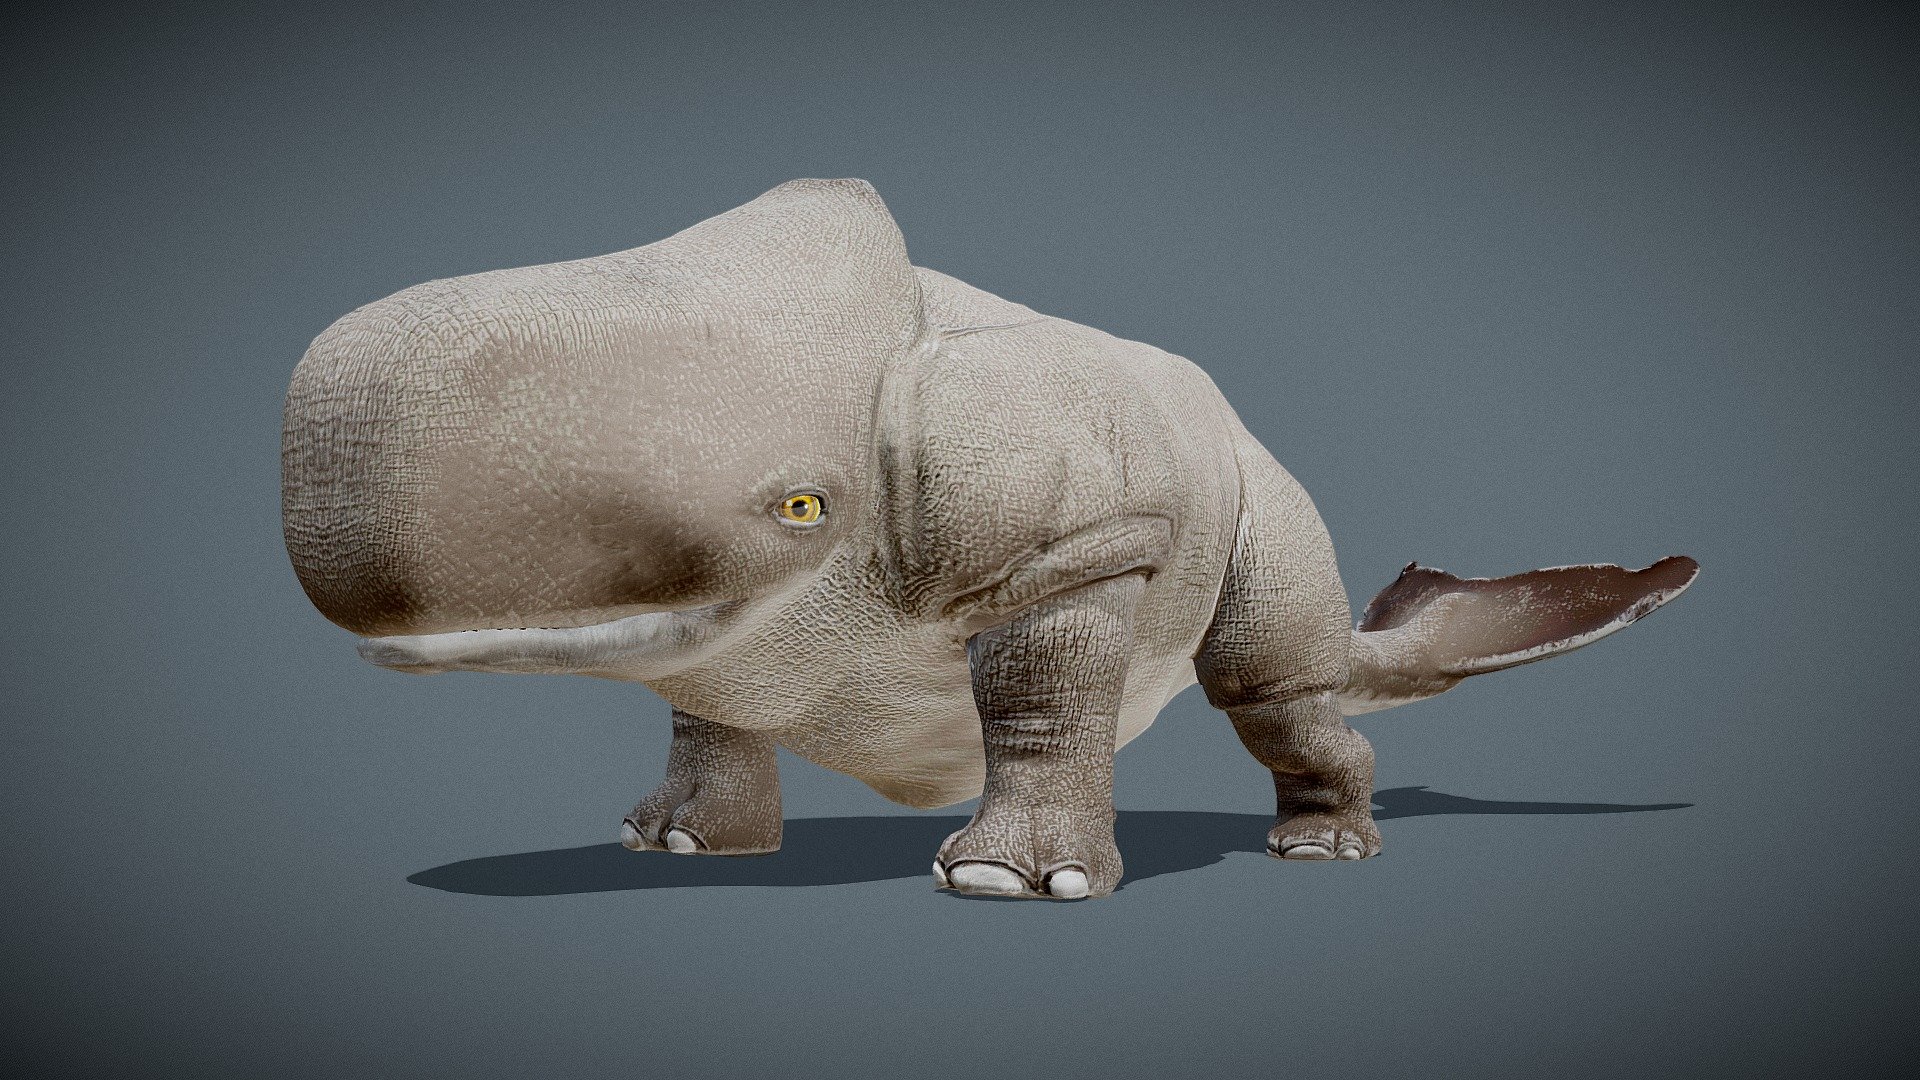 Hybrid creature of whale and rhino
sclupting : zbrush
retopo, rigging and animation : blender
texture : substance painter - Whale Rhino - 3D model by y.hiu (@too.yulianto) 3d model